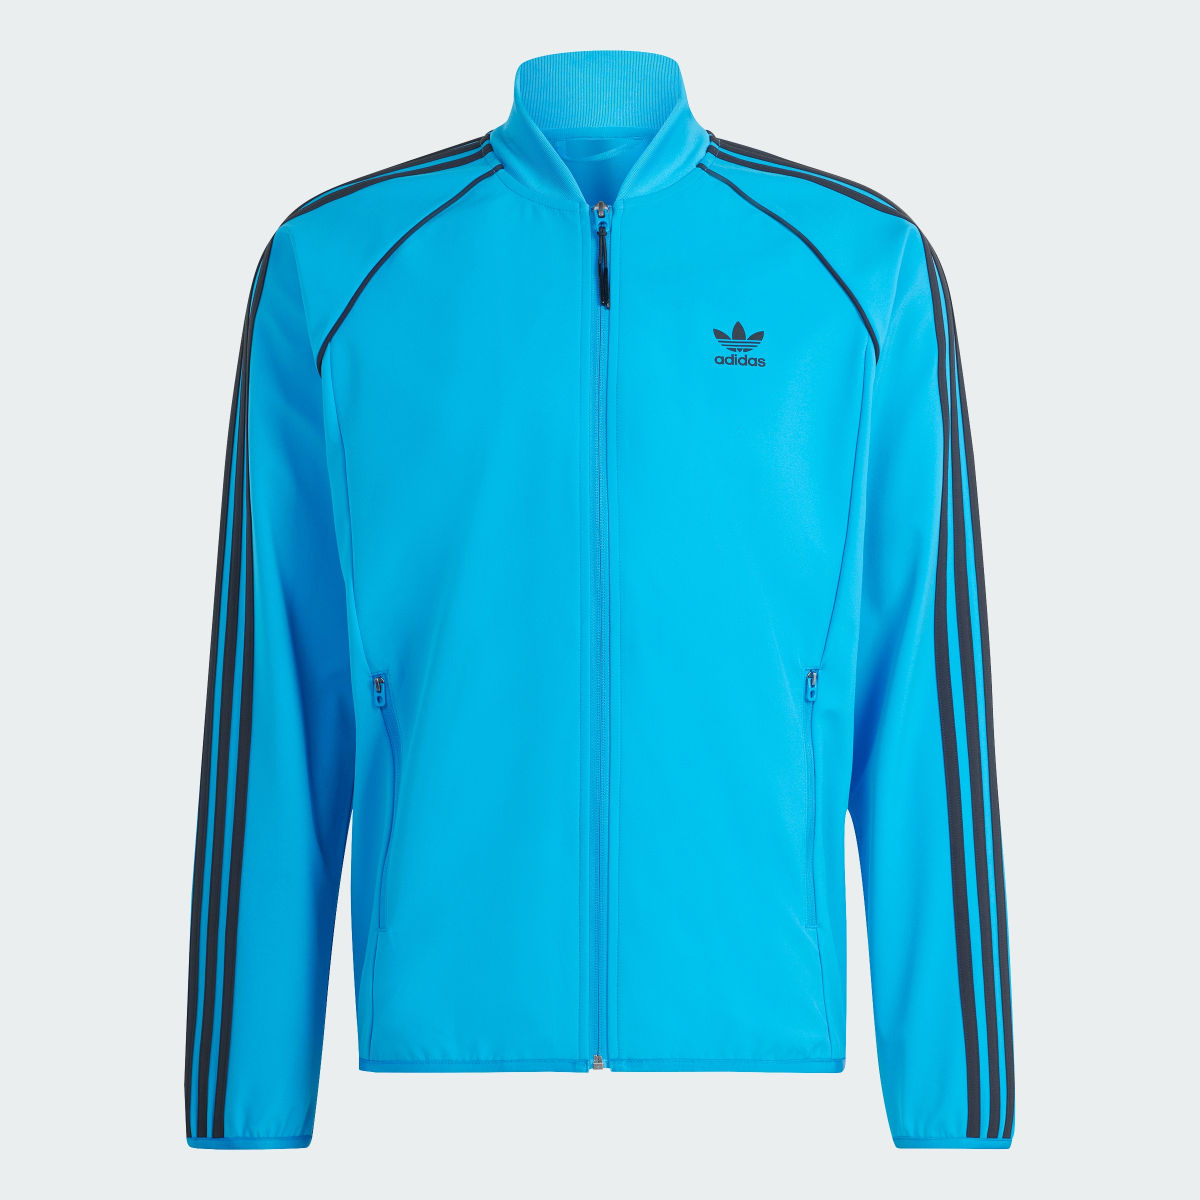 Adidas Track top SST Bonded. 5